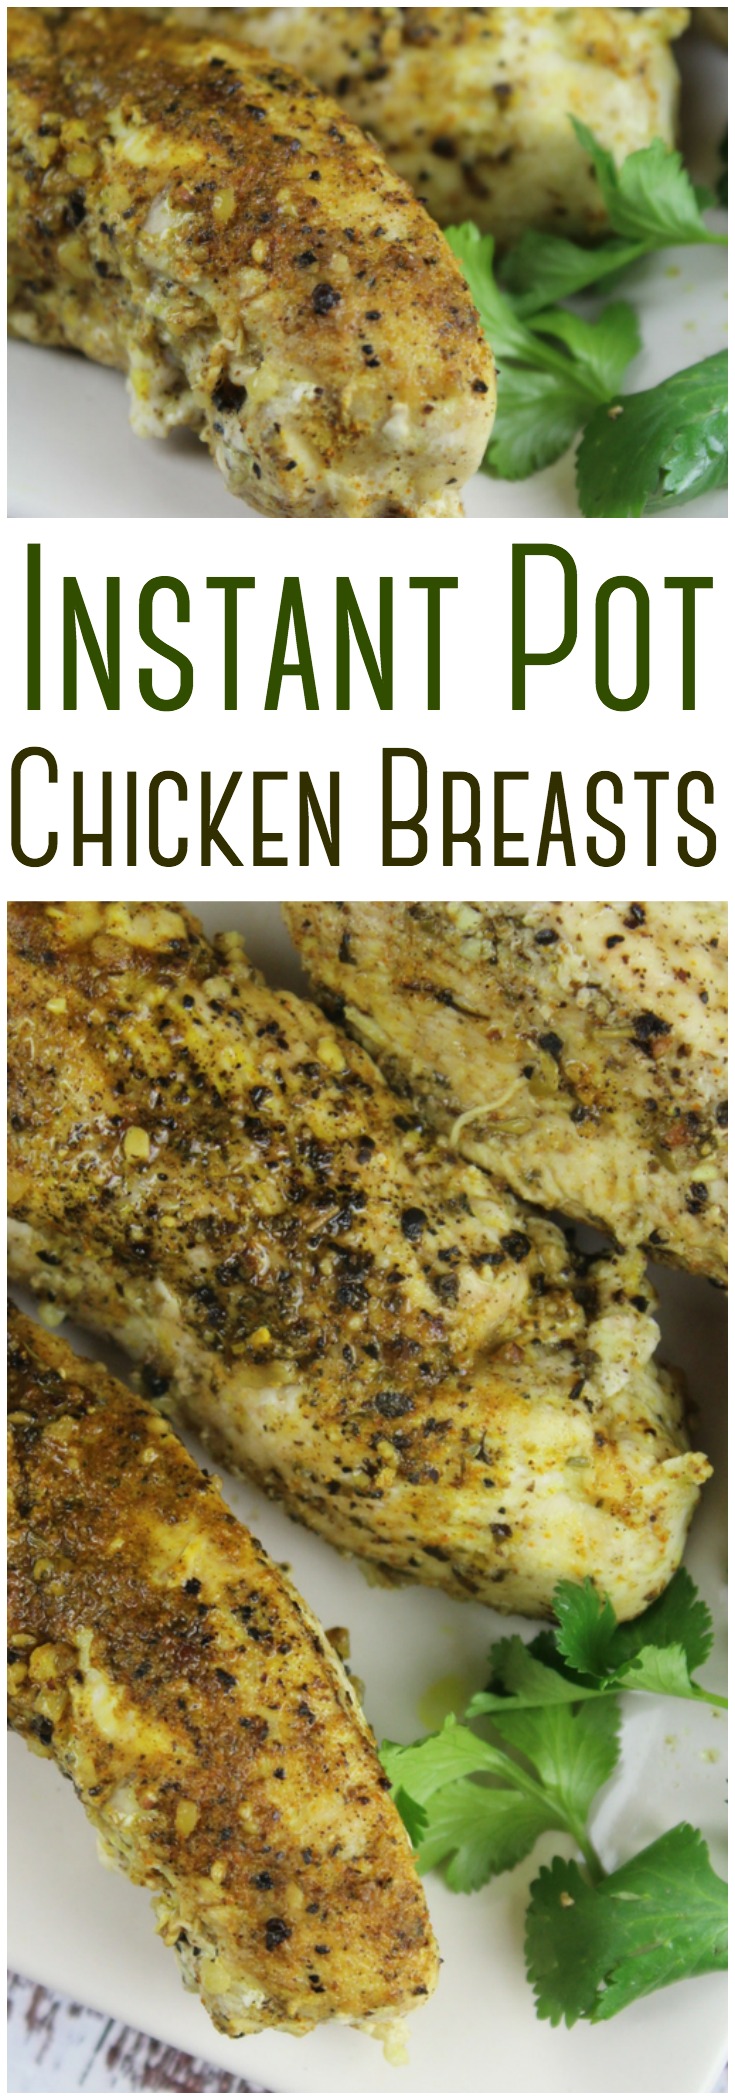 Cook up healthy, most, and delicious chicken breasts in your Instant Pot in just minutes! #InstantPot #chicken #chickenbreasts #pressurecooker #boneless #healthy